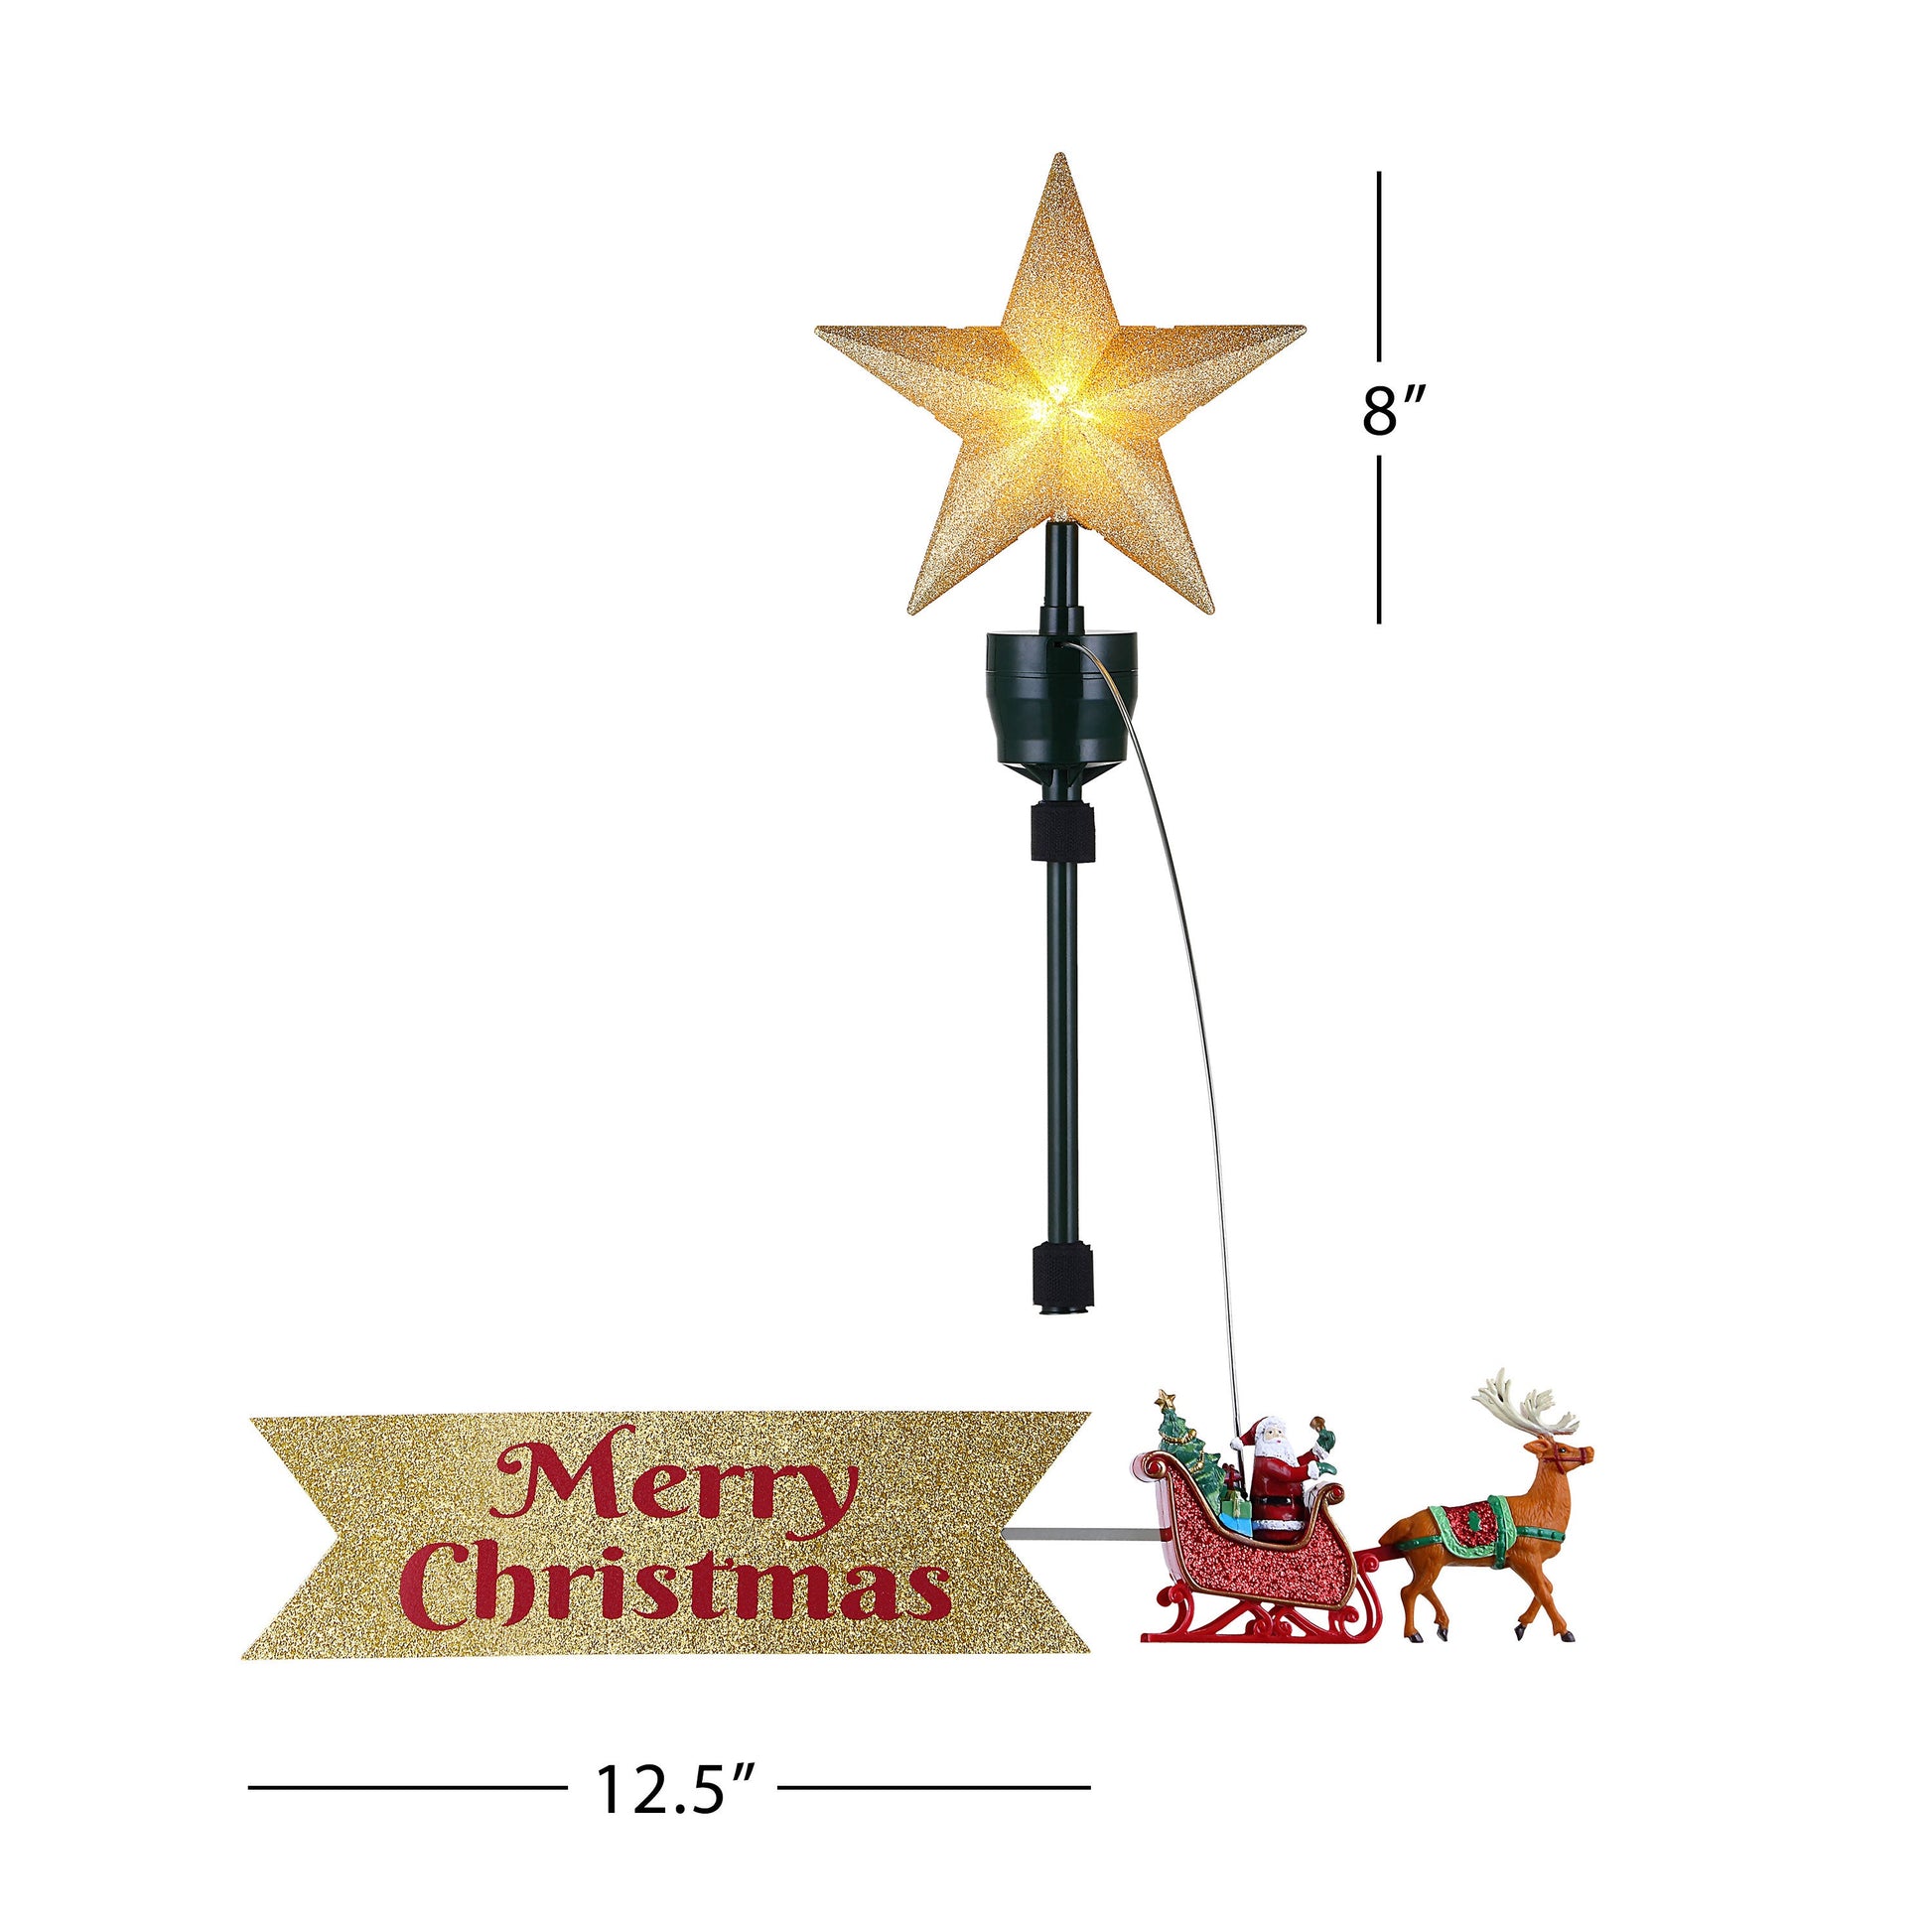 90th Anniversary Collection - Animated Santa's Sleigh Tree Topper with Banner - Mr. Christmas